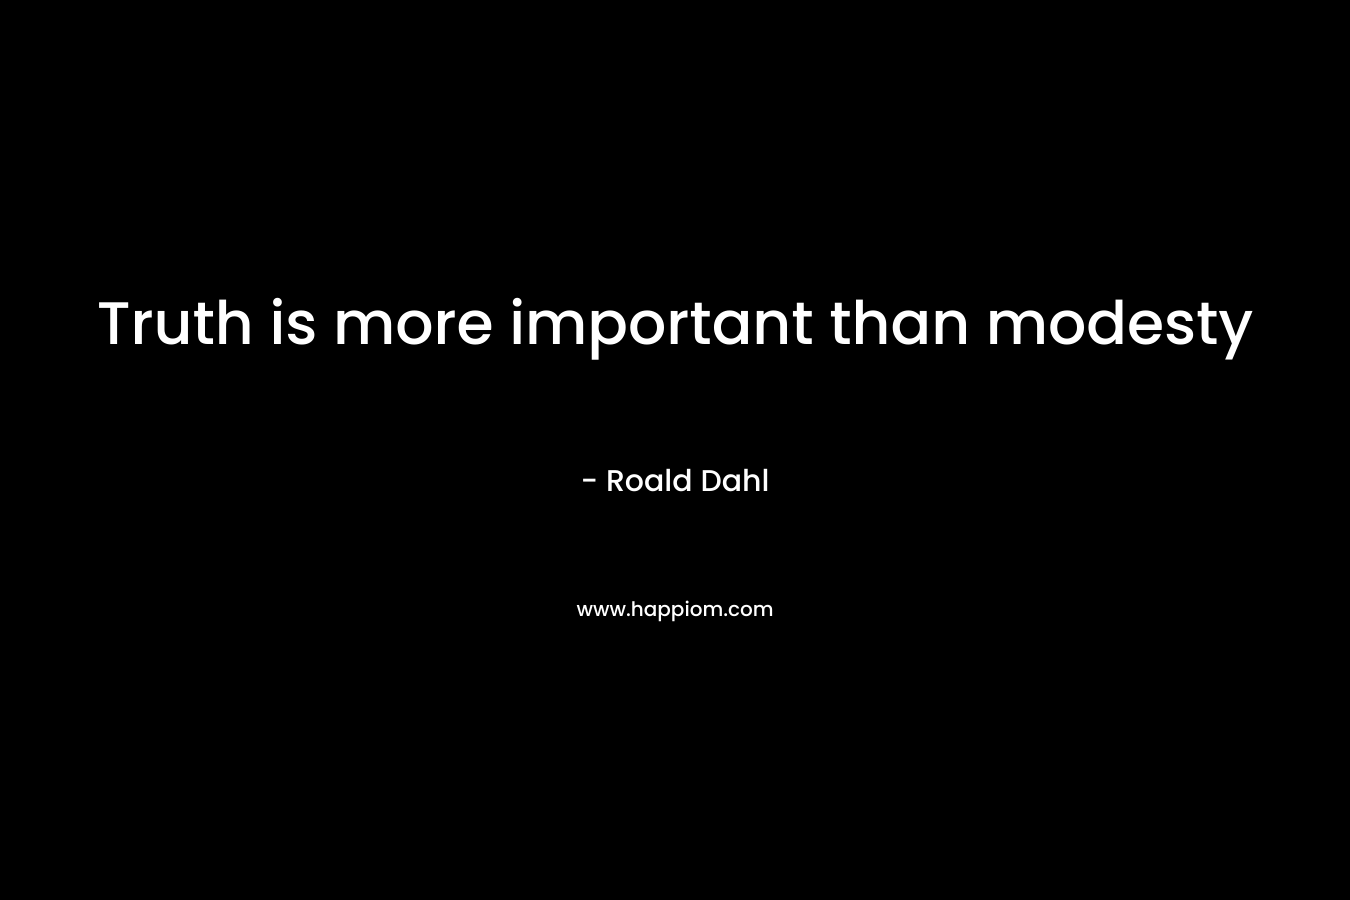 Truth is more important than modesty